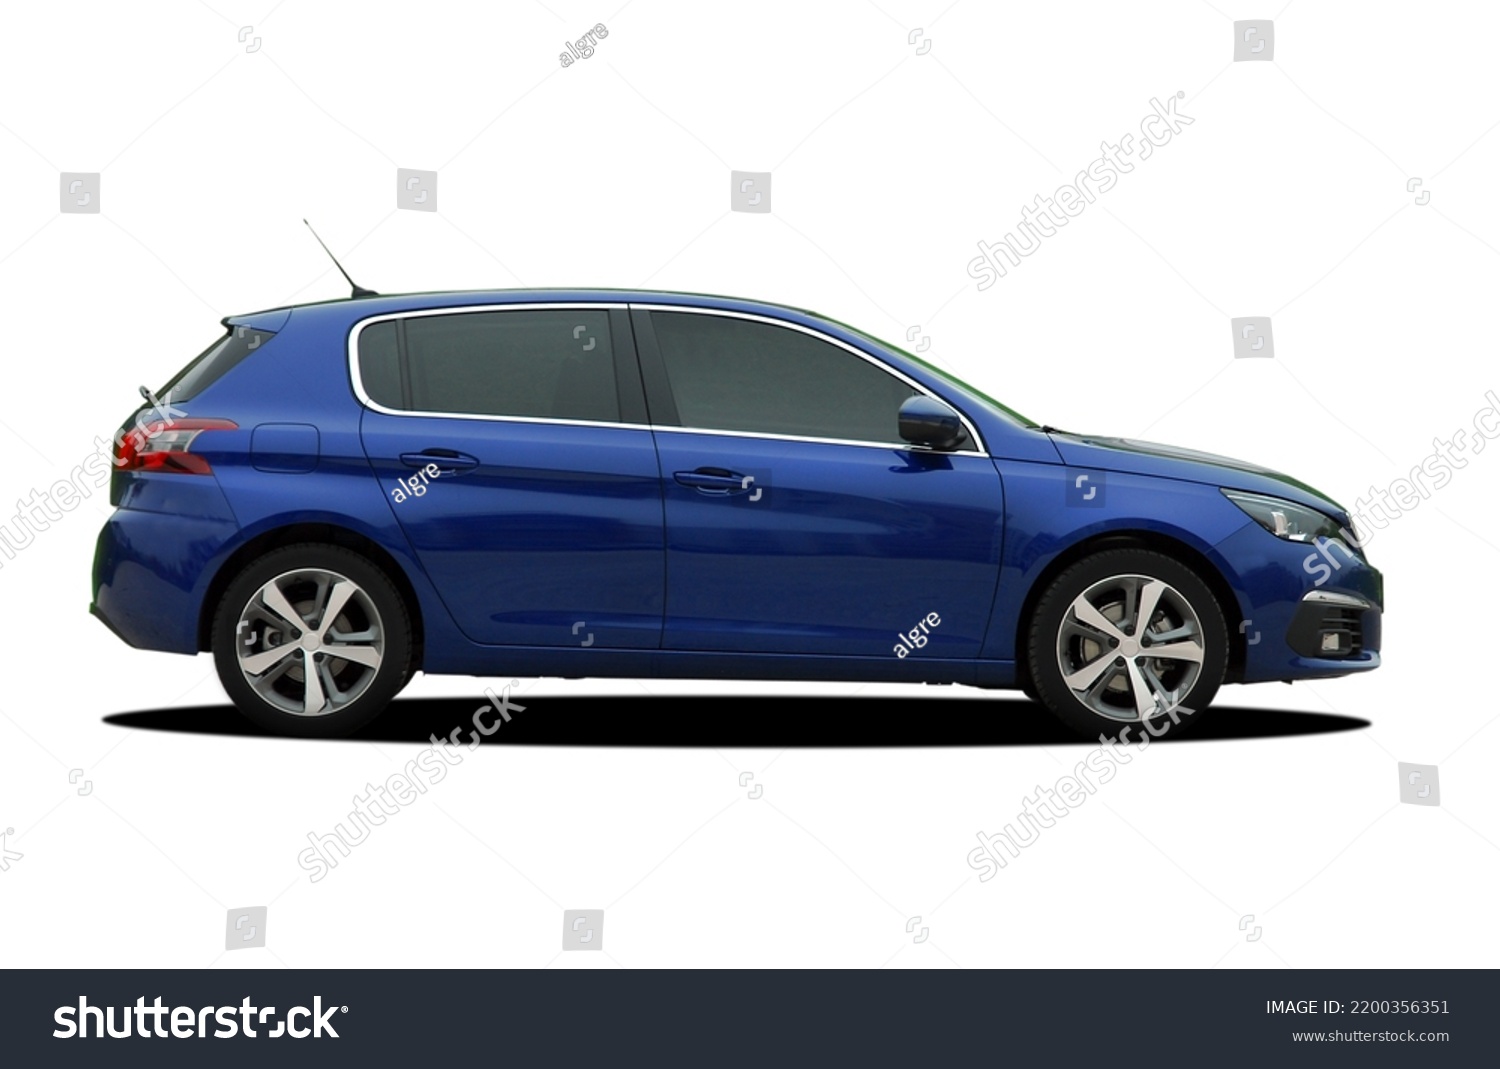 Passenger car on a white background, side view  #2200356351